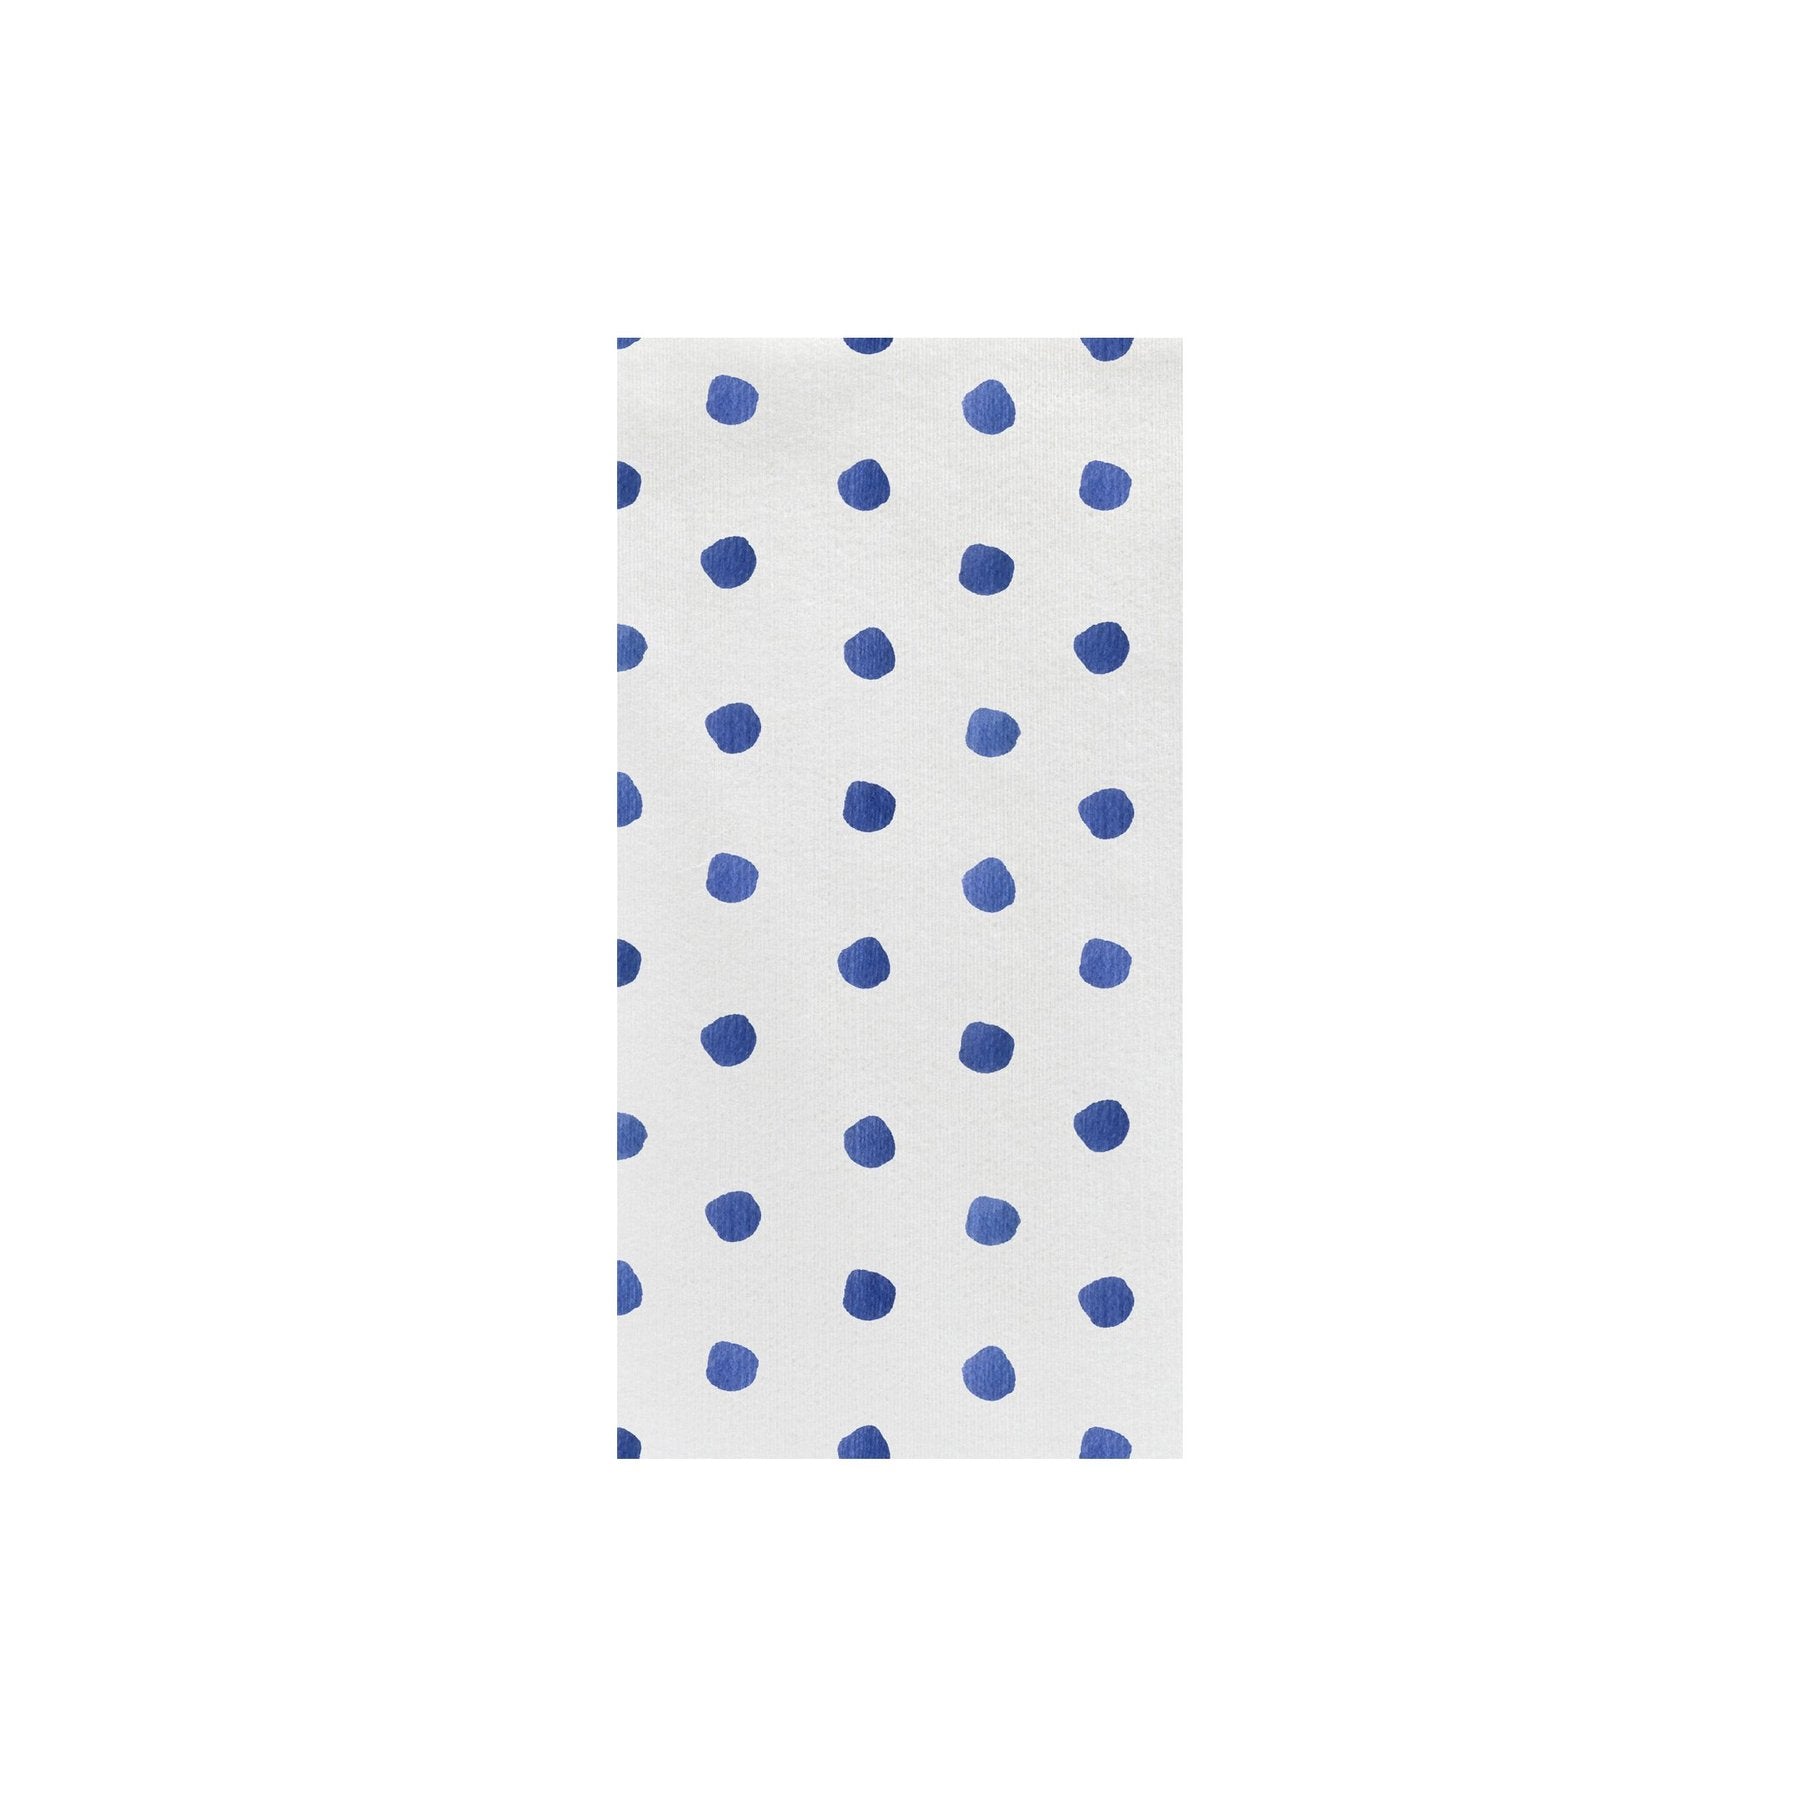 Papersoft Napkins Blue Dot Guest Towels - Pack of 50